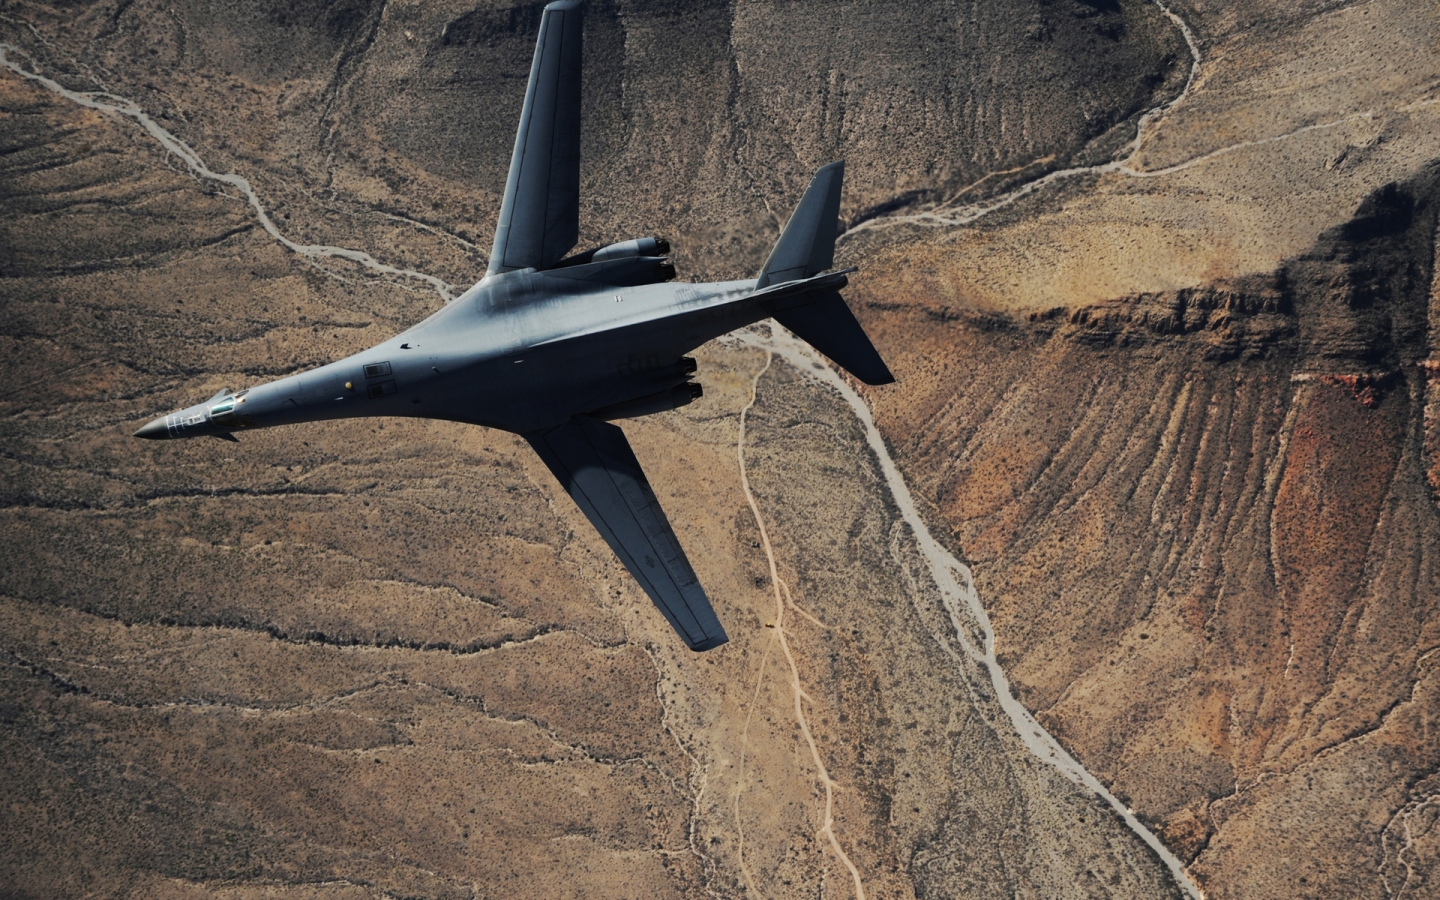 Rockwell B1 Lancer for 1440 x 900 widescreen resolution